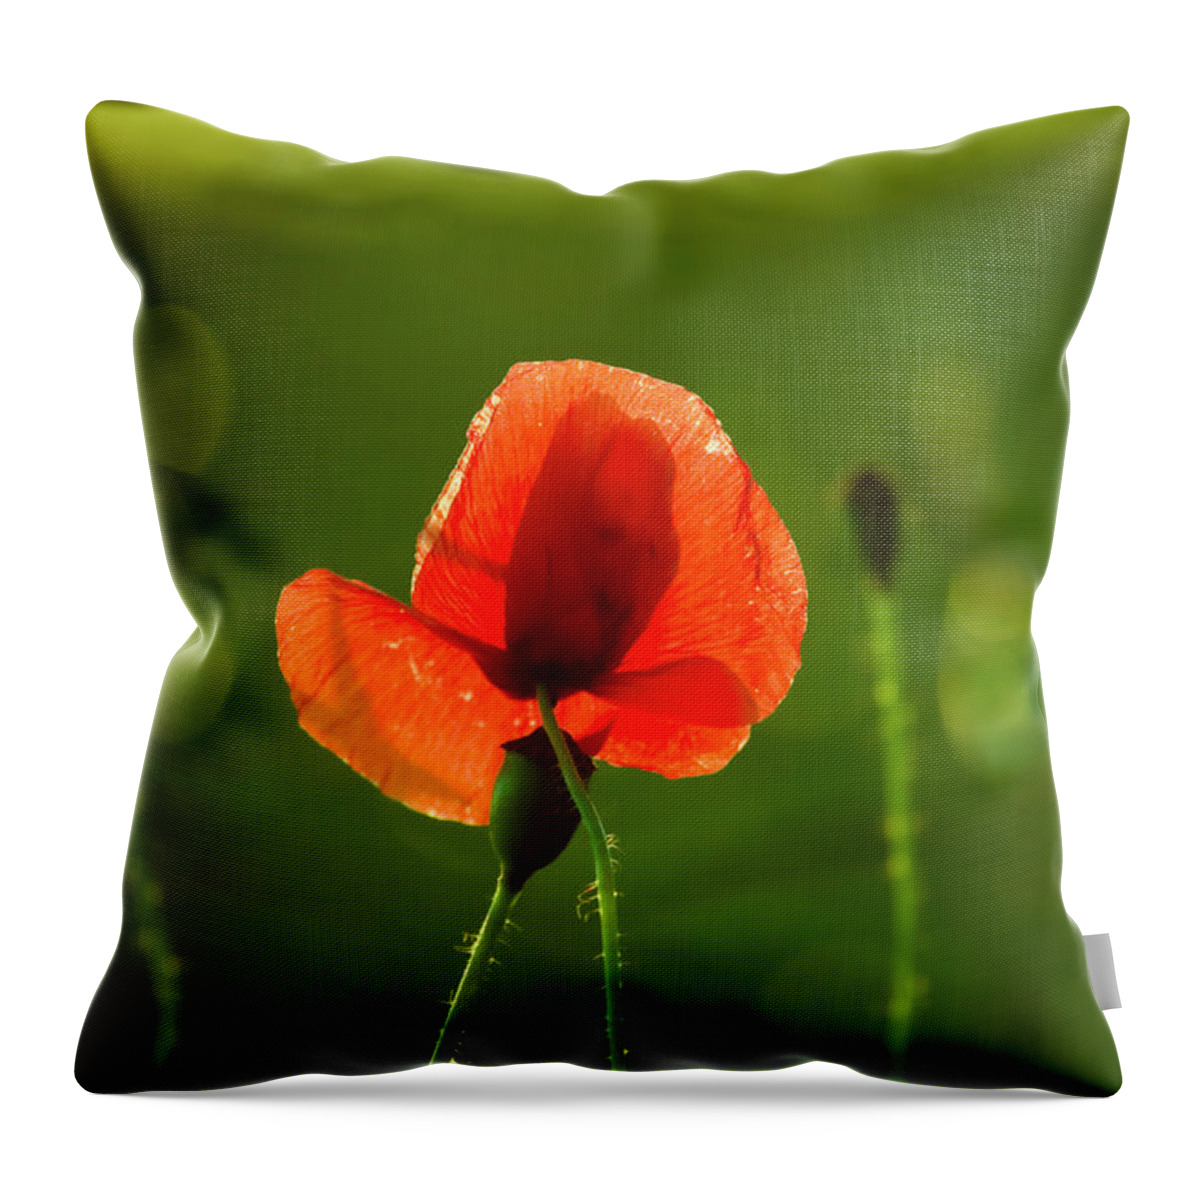 Outdoors Throw Pillow featuring the photograph Poppy Flower by Andreaskermann